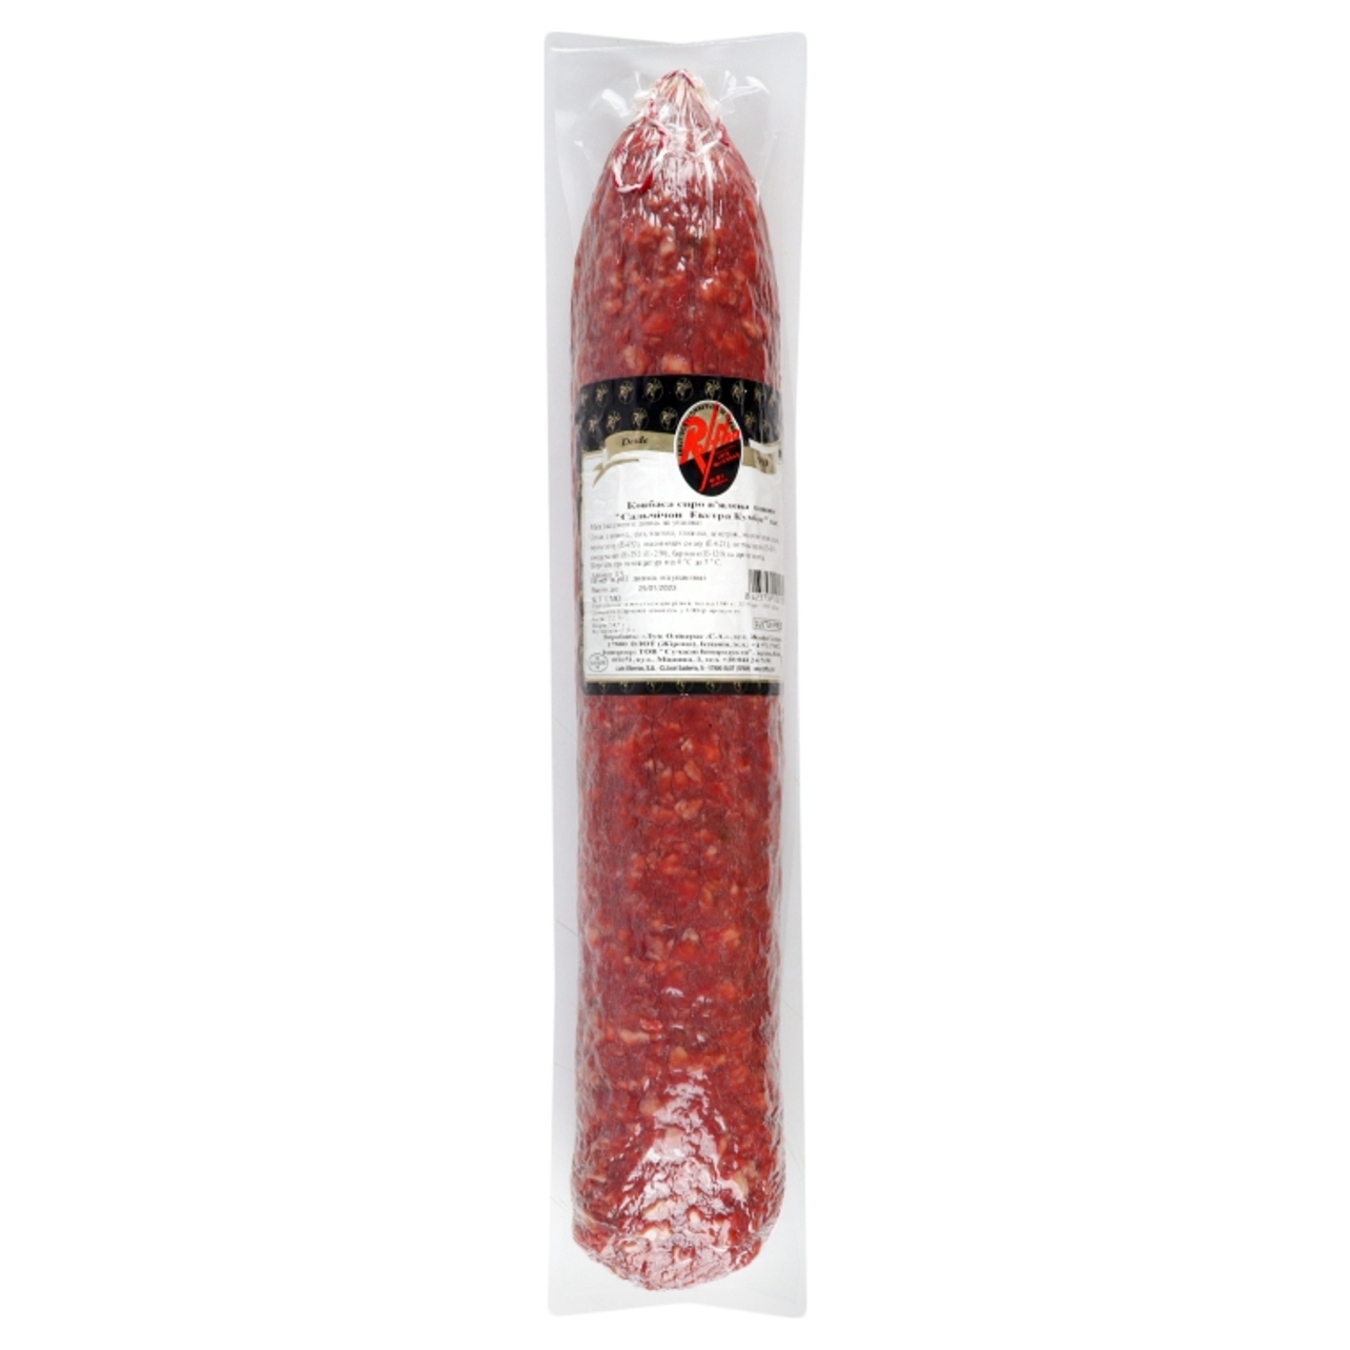 Rolfho Salchichon Extra Cumbre sausage is gray-cured